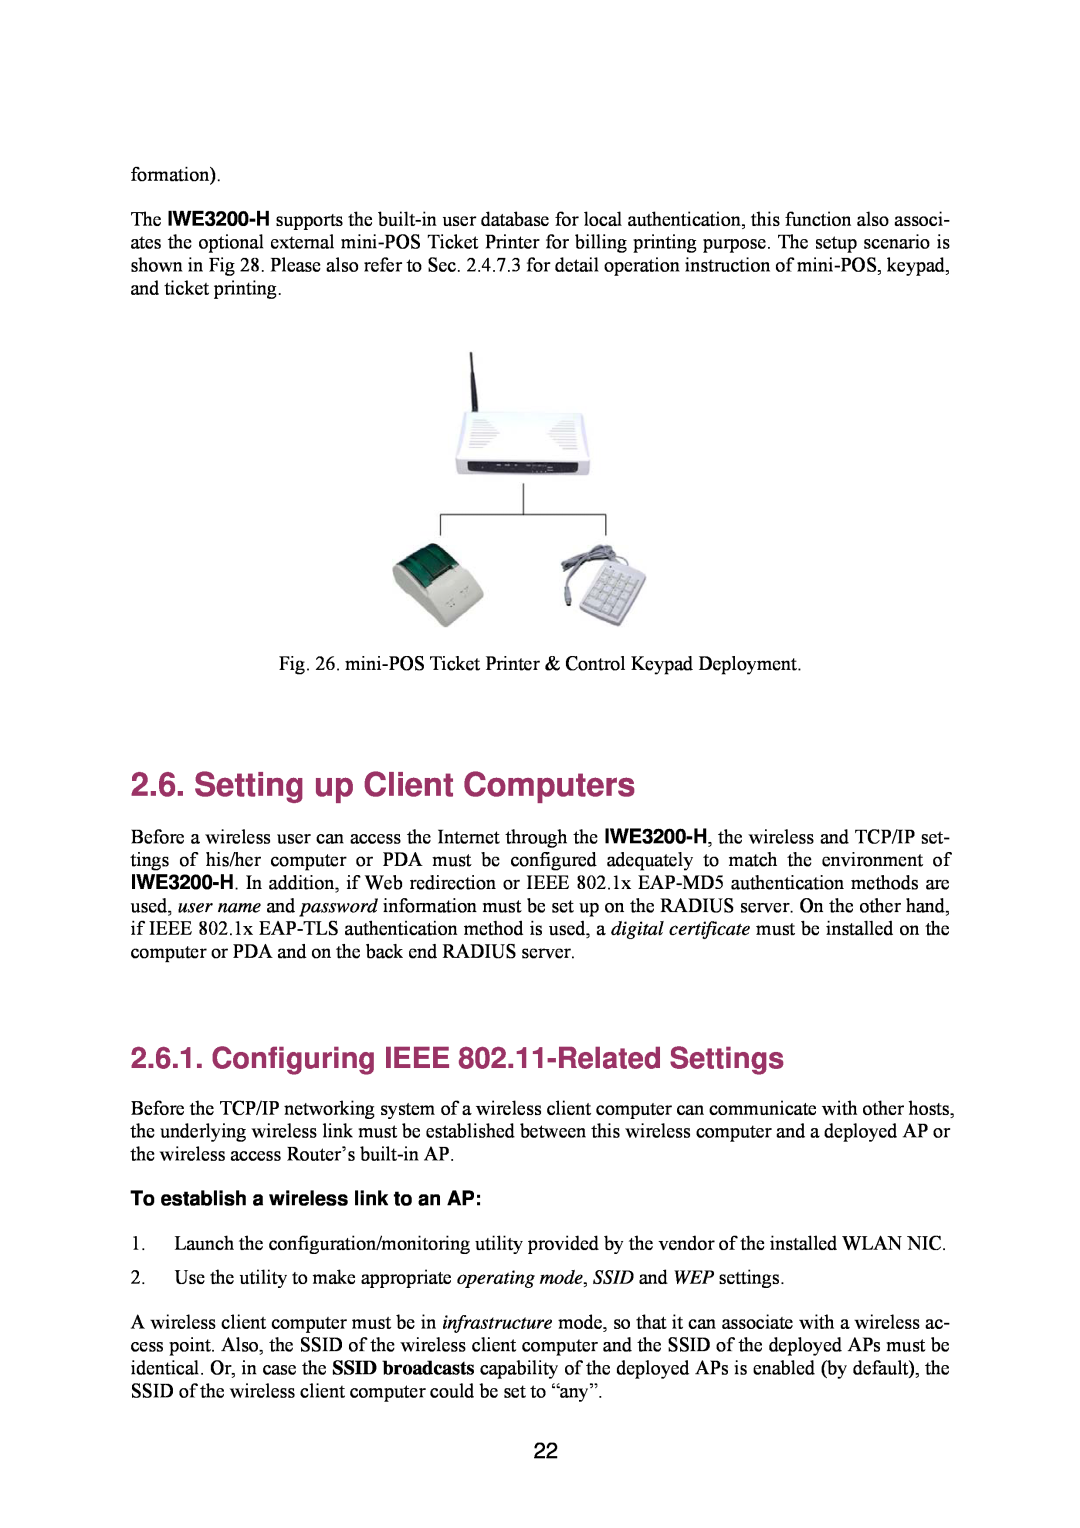 Epson IWE3200-H manual Setting up Client Computers, Configuring IEEE 802.11-RelatedSettings 